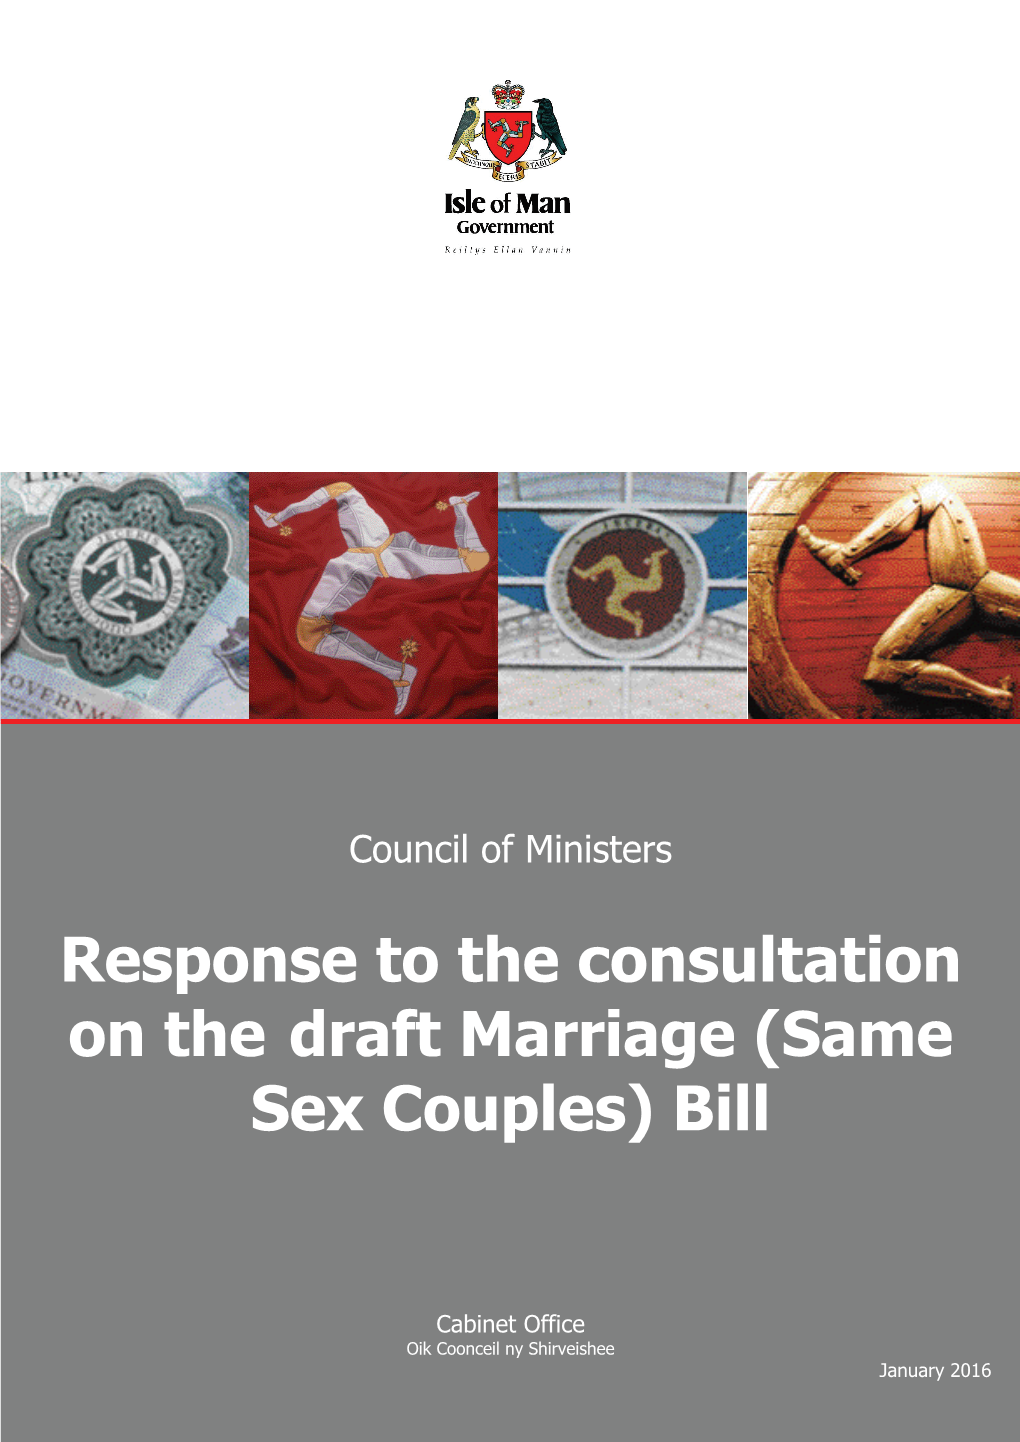 Response to the Consultation on the Draft Marriage (Same Sex Couples) Bill